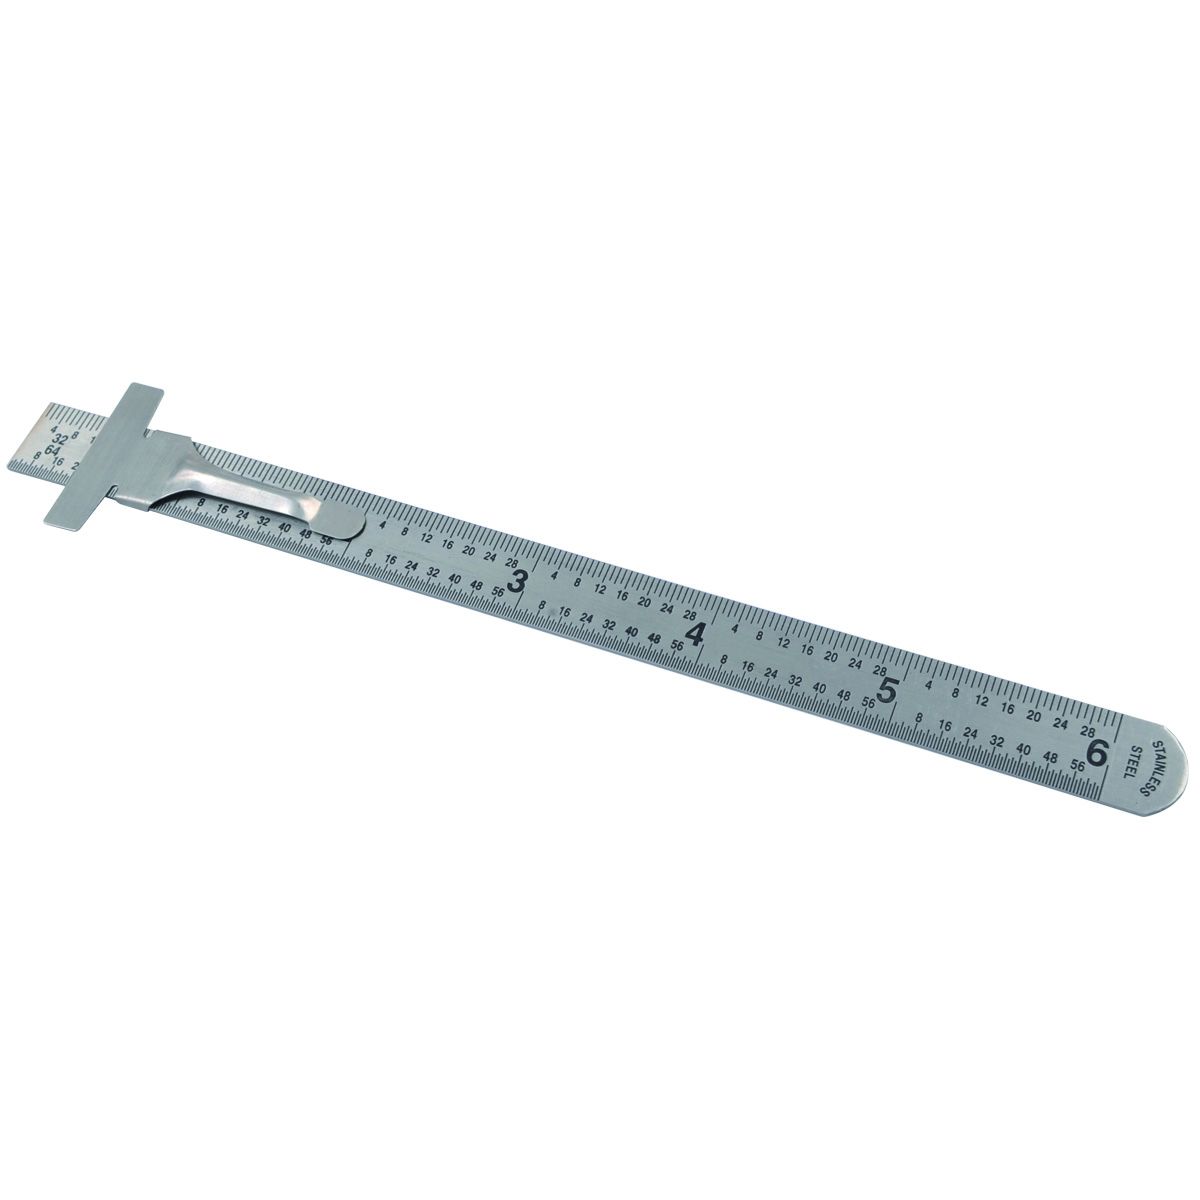 6 X 15/32" STAINLESS STEEL RULER (32NDS-64THS & DECIMAL) (7006-0001)